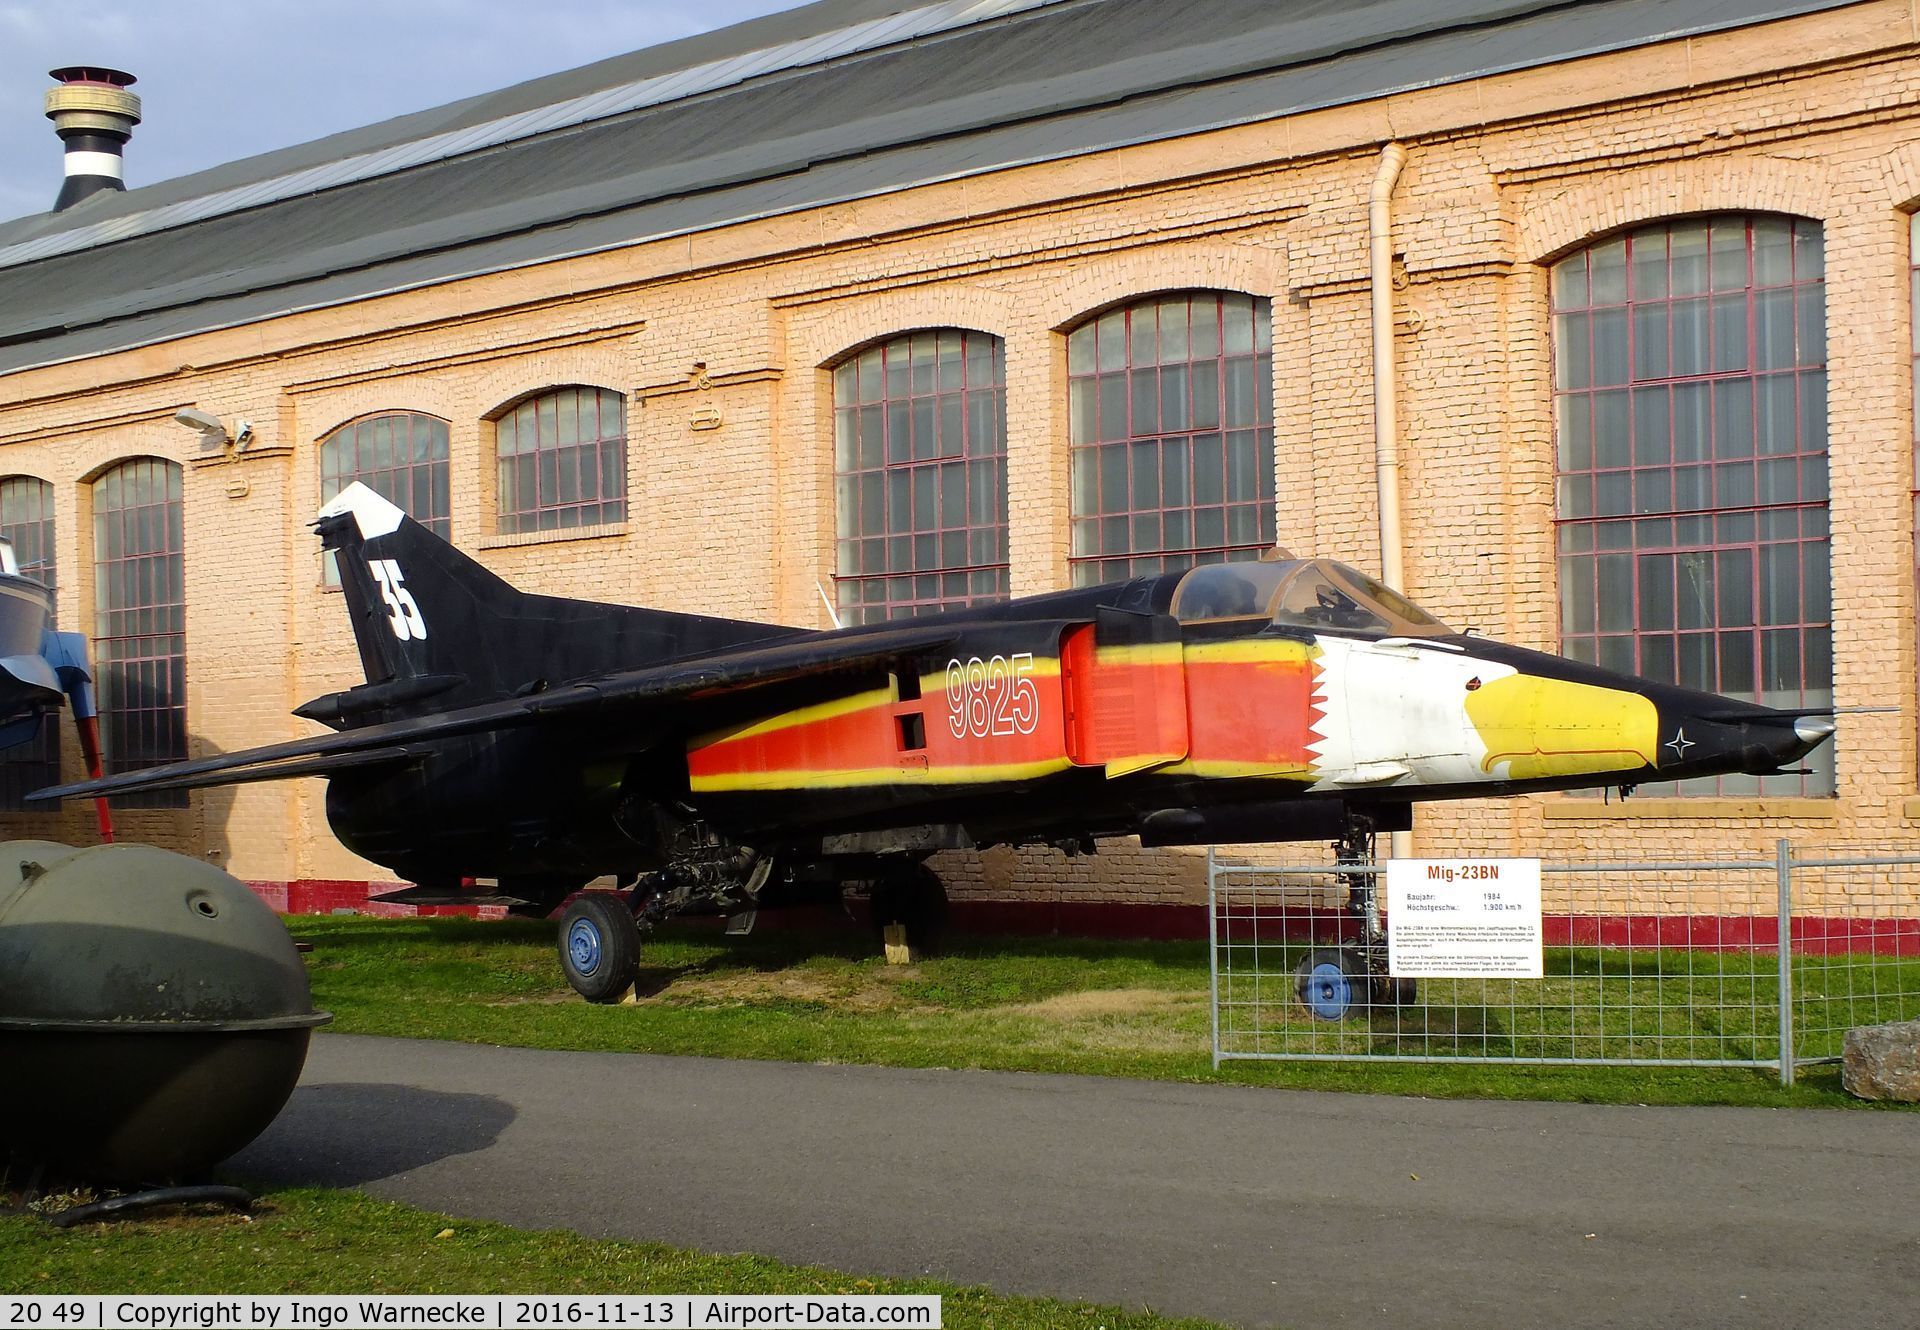 20 49, Mikoyan-Gurevich MiG-23BN C/N 2963222830, Mikoyan i Gurevich MiG-23BN FLOGGER-H, painted to resemble an aircraft of the czechoslovak airforce, at the Technik-Museum, Speyer